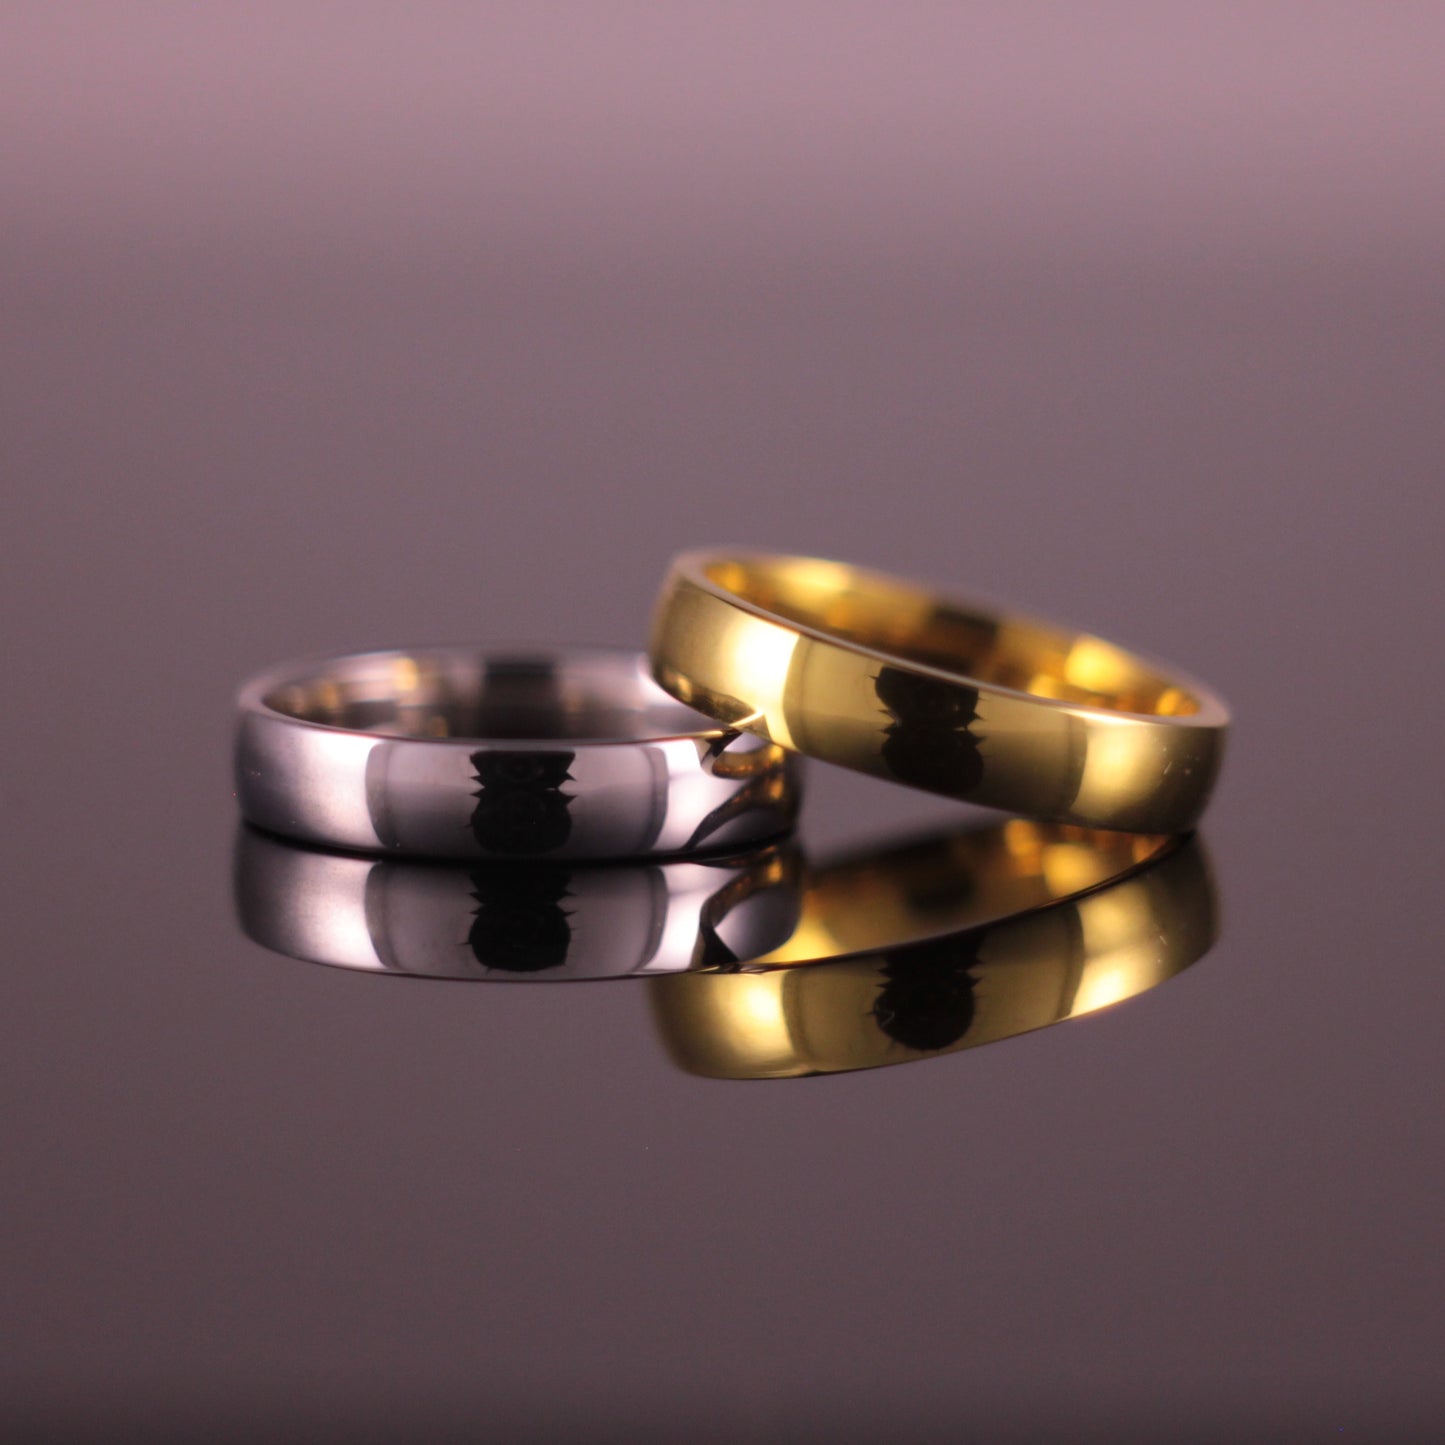 4mm 'D' Profile Band in 18ct White Gold & Yellow Gold